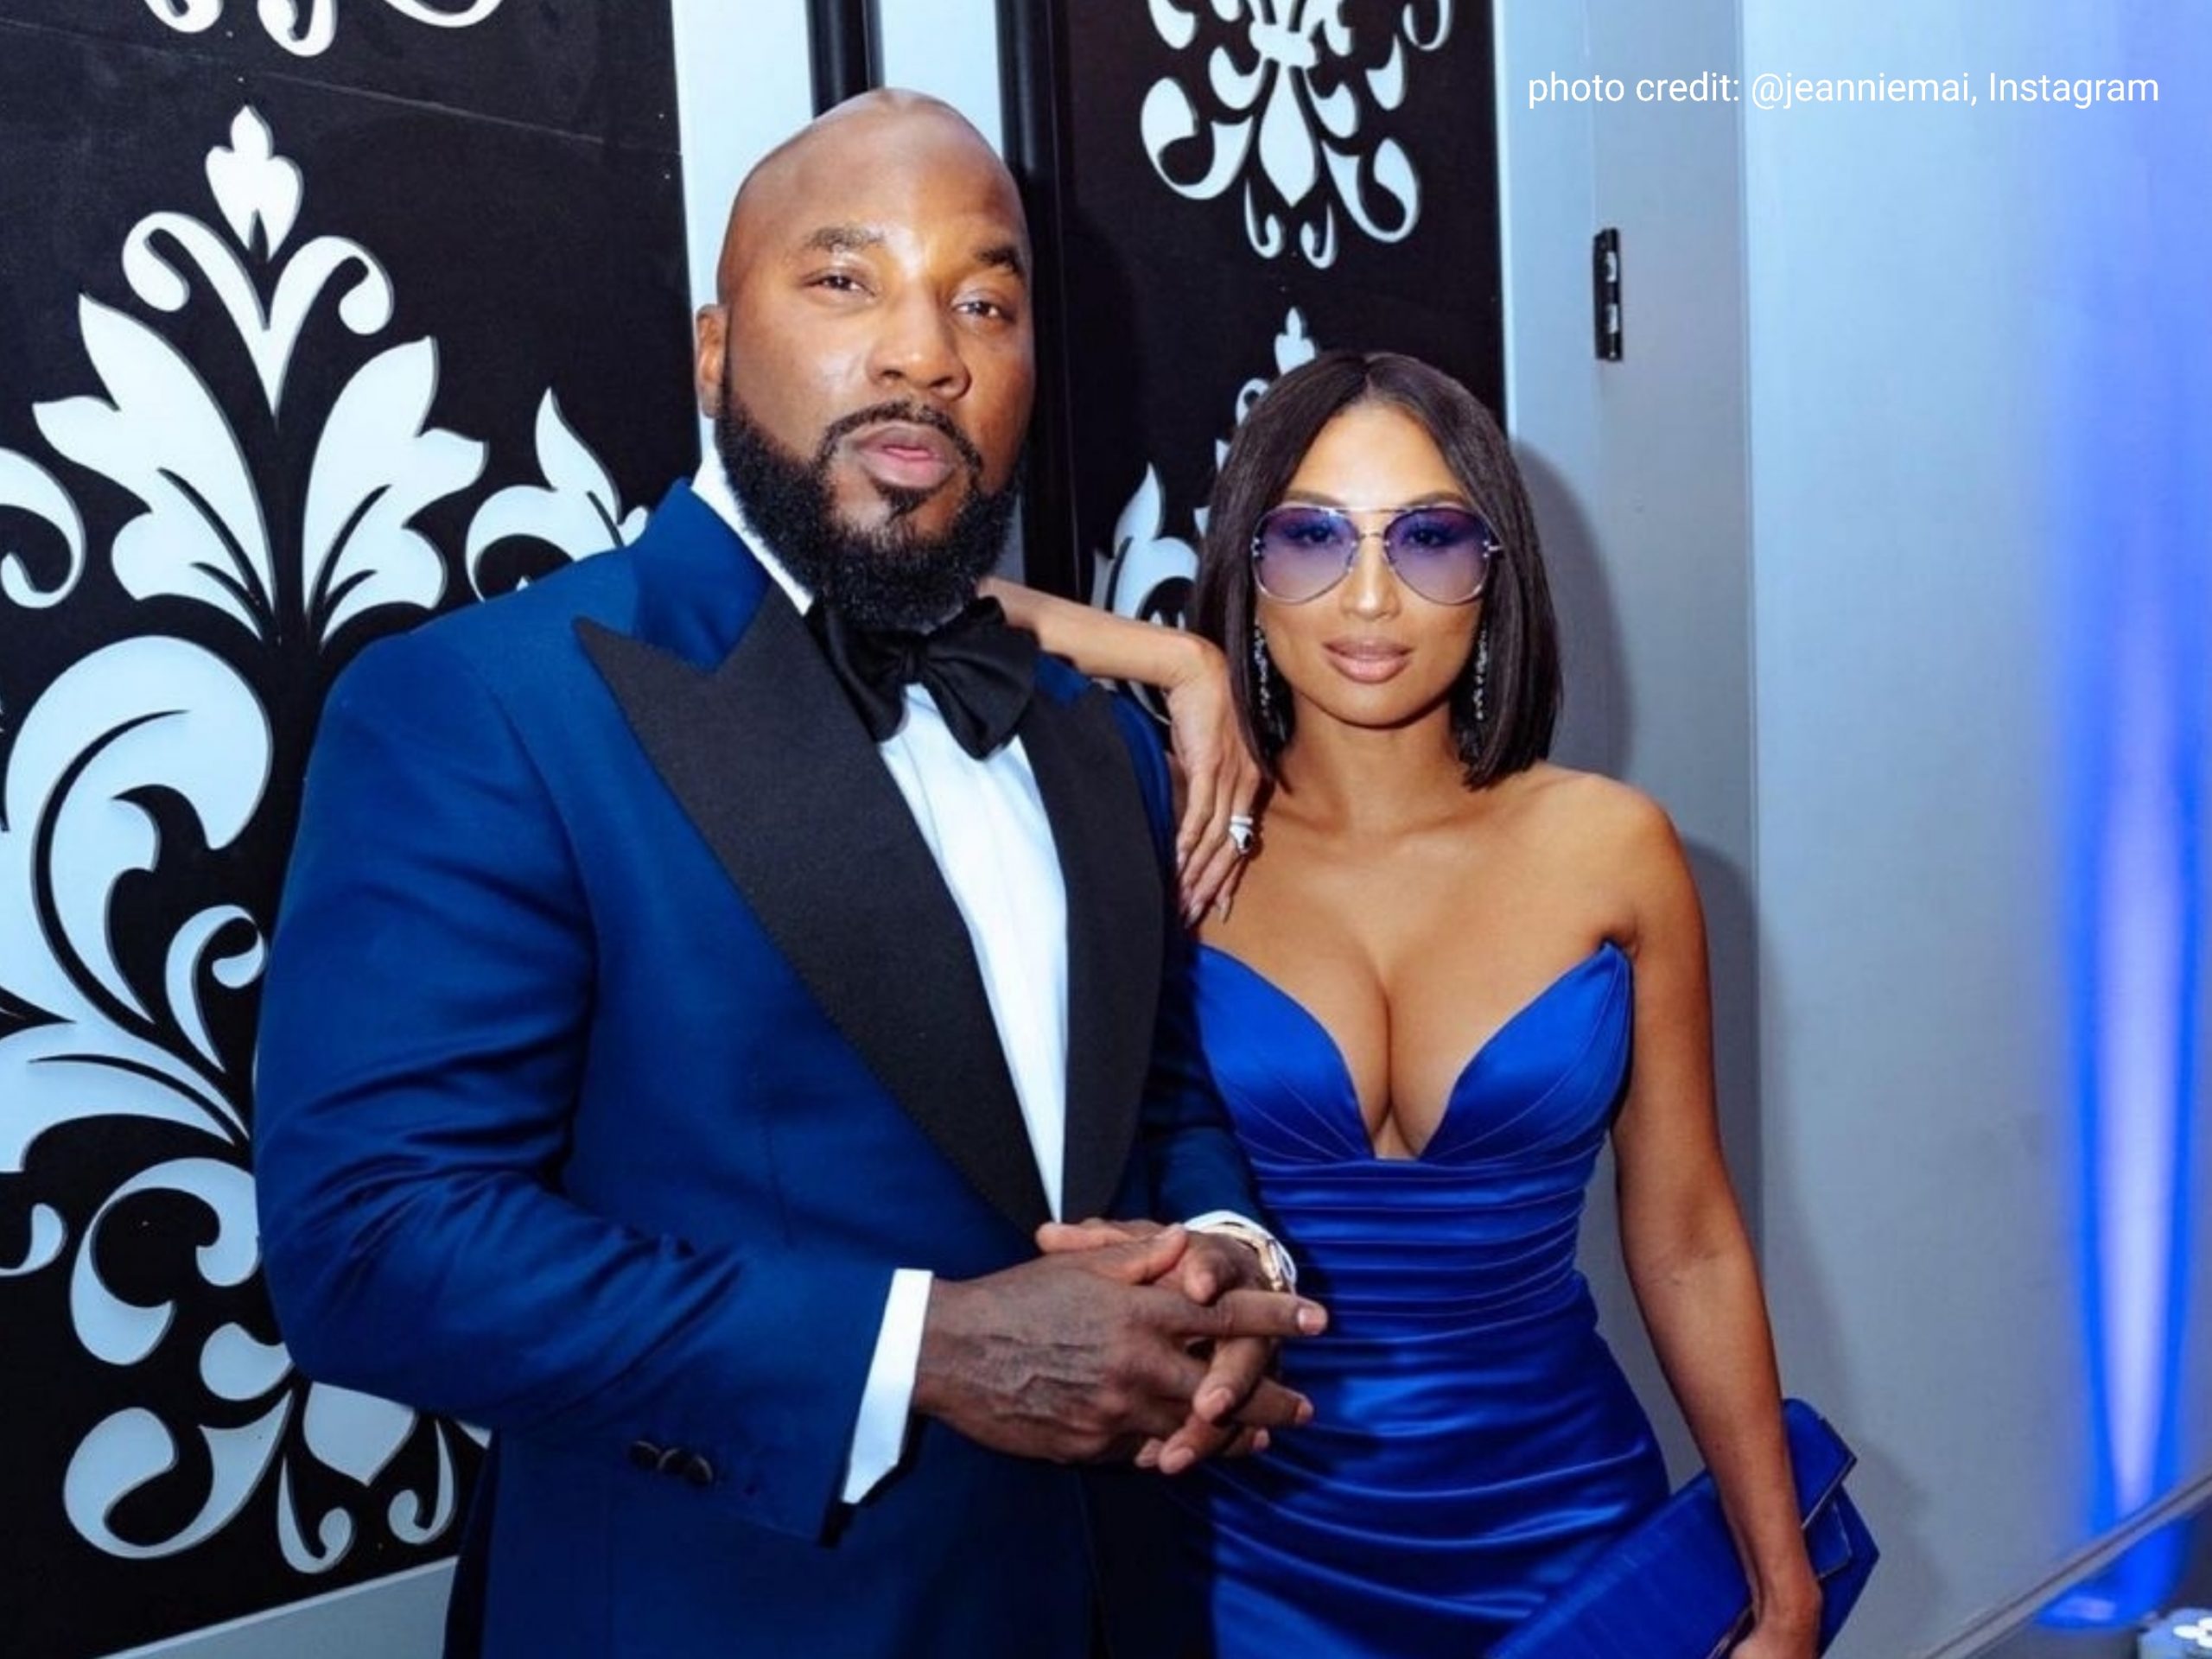 Jeezy Files For Divorce From Jeannie Mai After 2 Years of Marriage